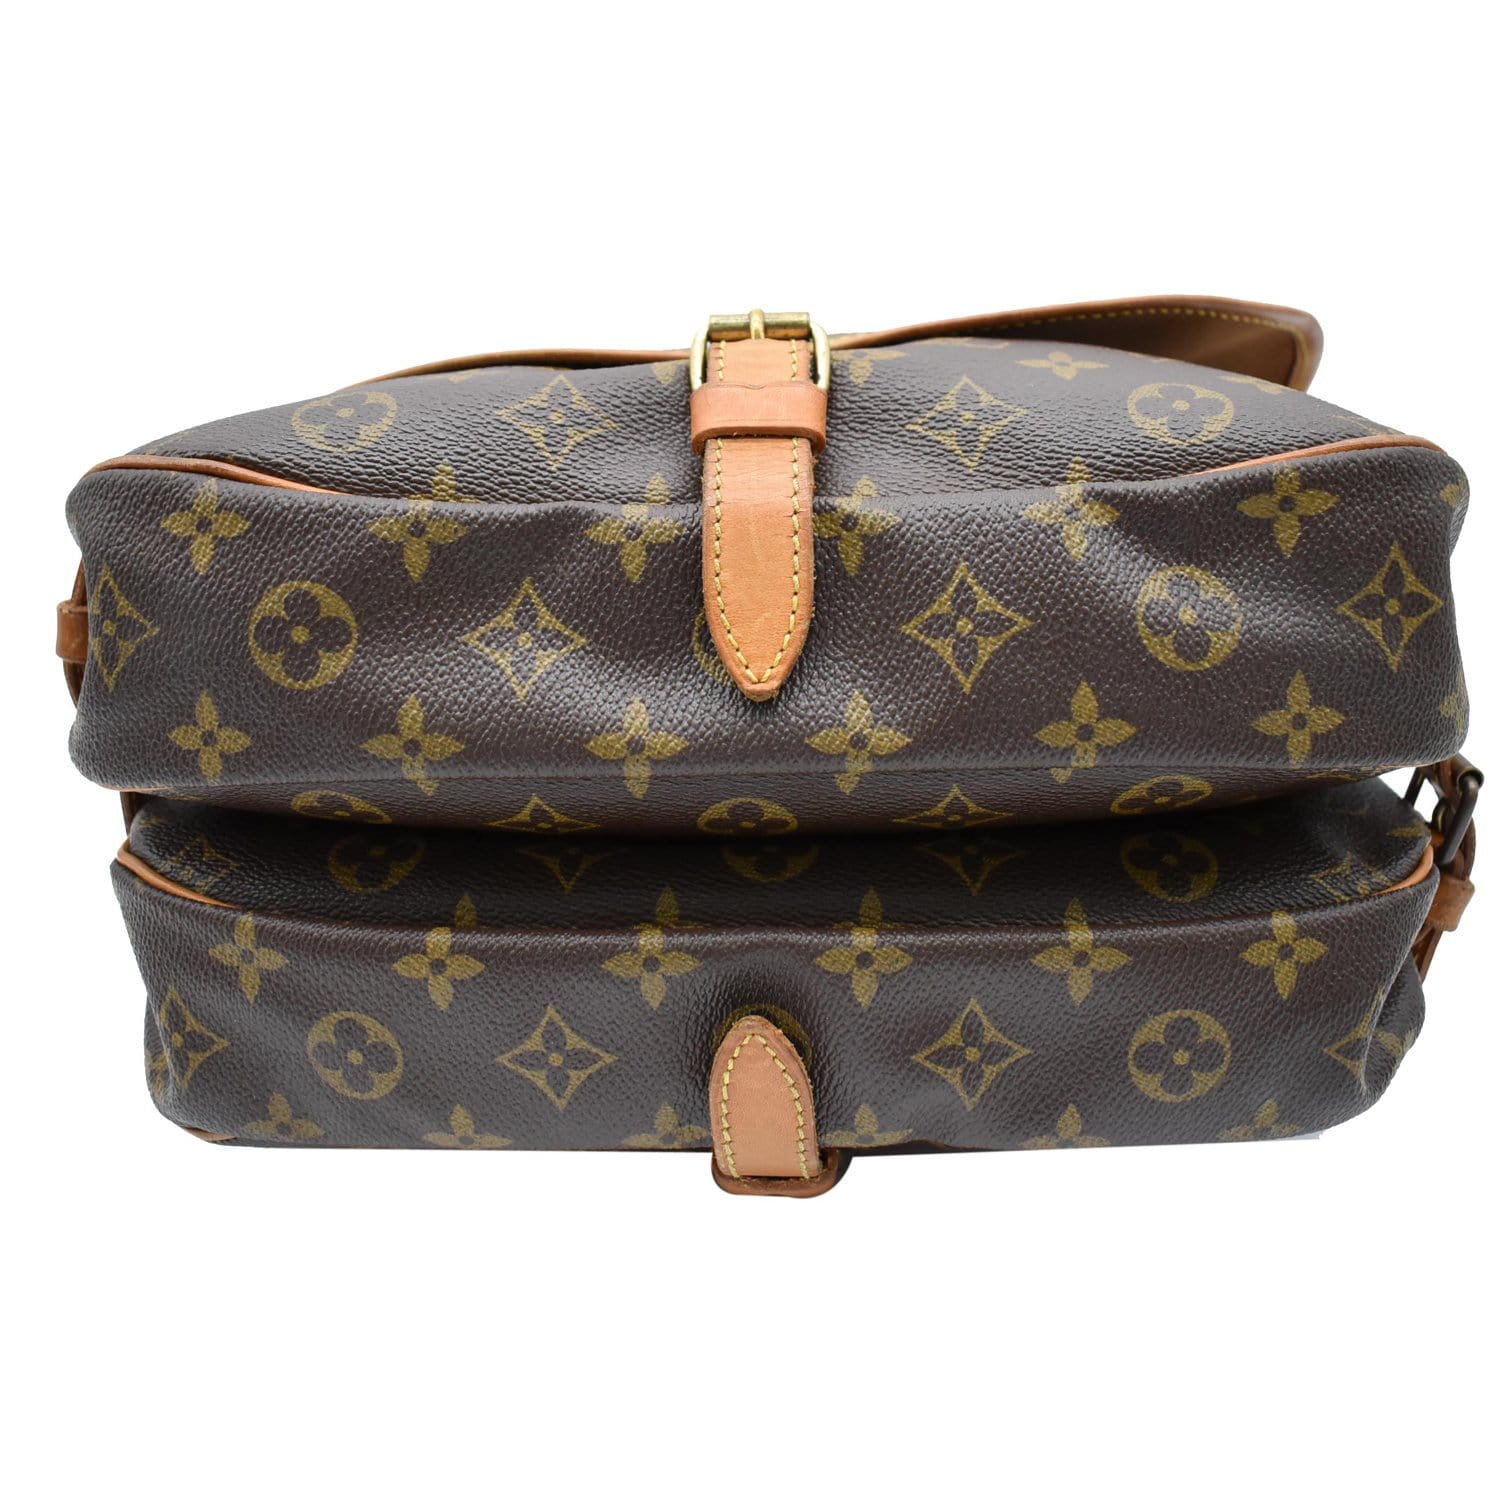 Louis Vuitton Saumur 30 Review - The start of my obsession 